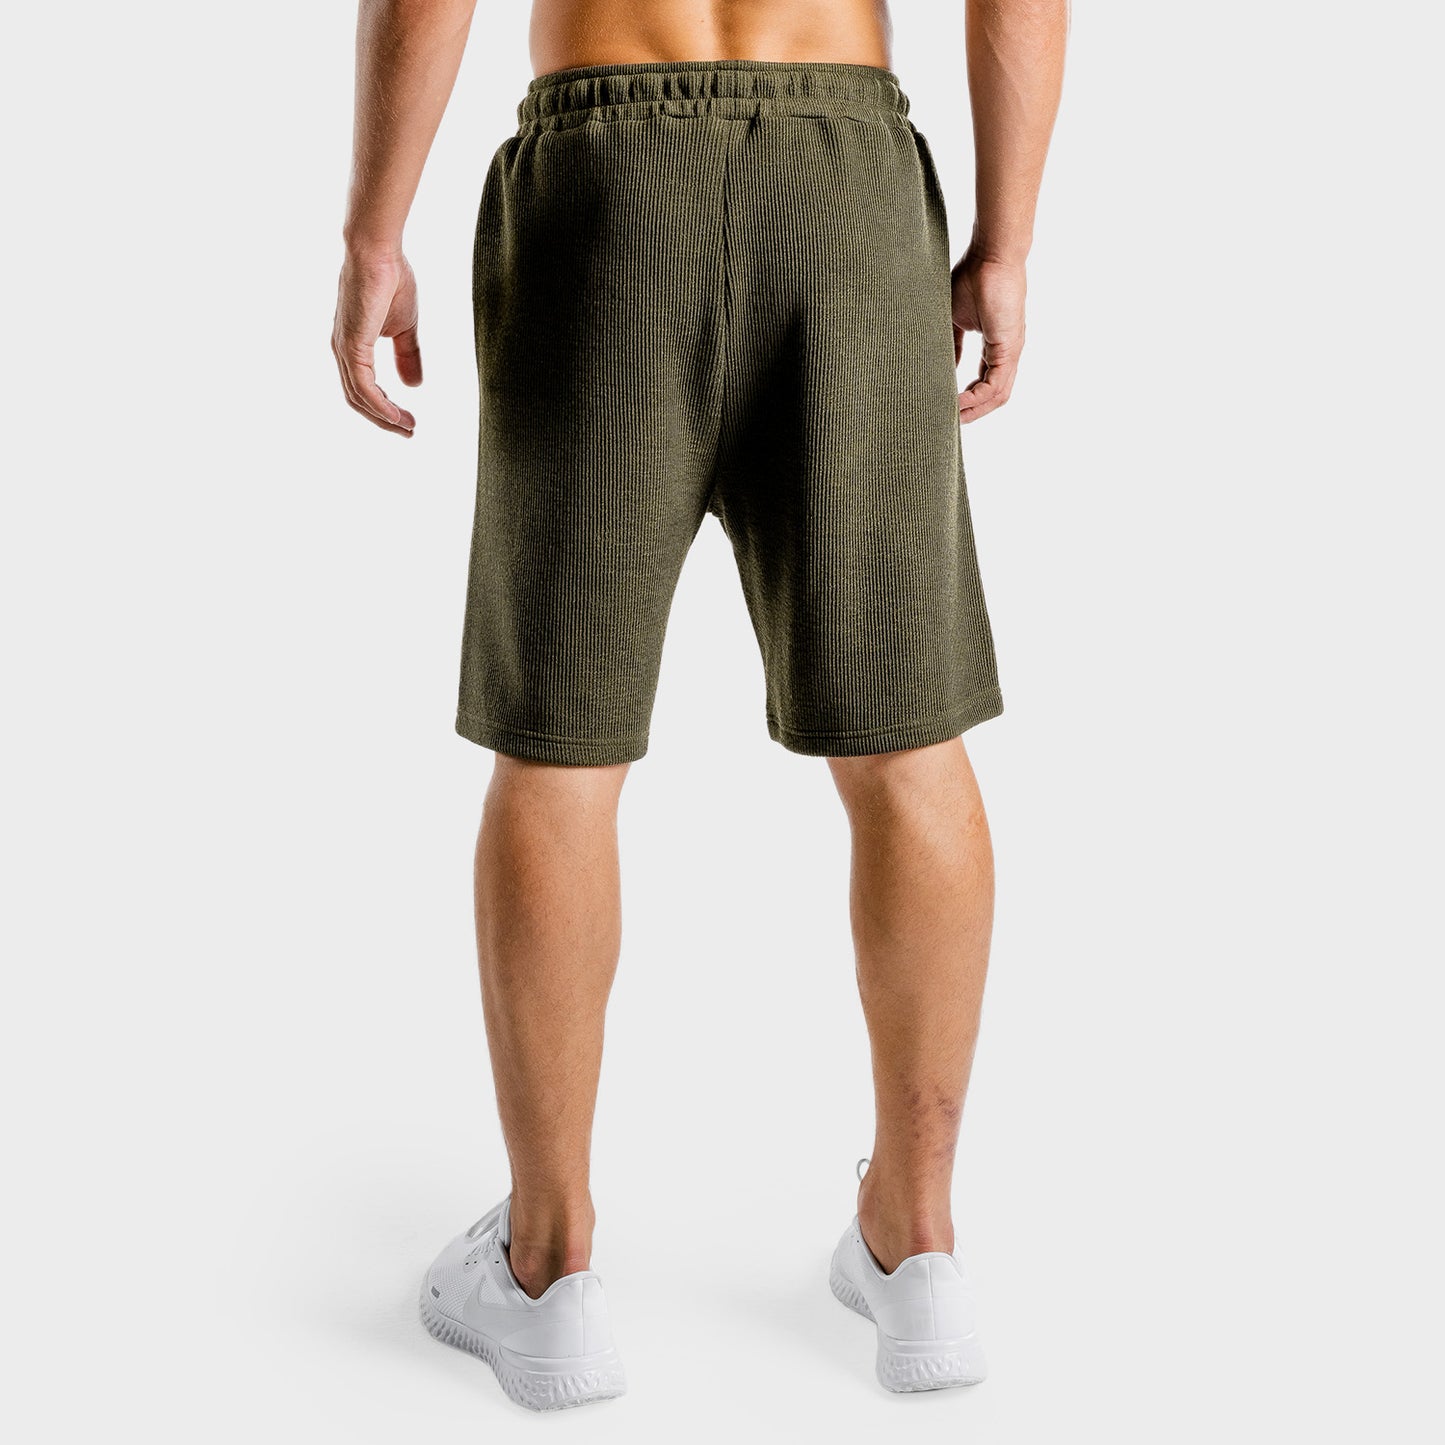 squatwolf-gym-wear-luxe-shorts-green-workout-shorts-for-men